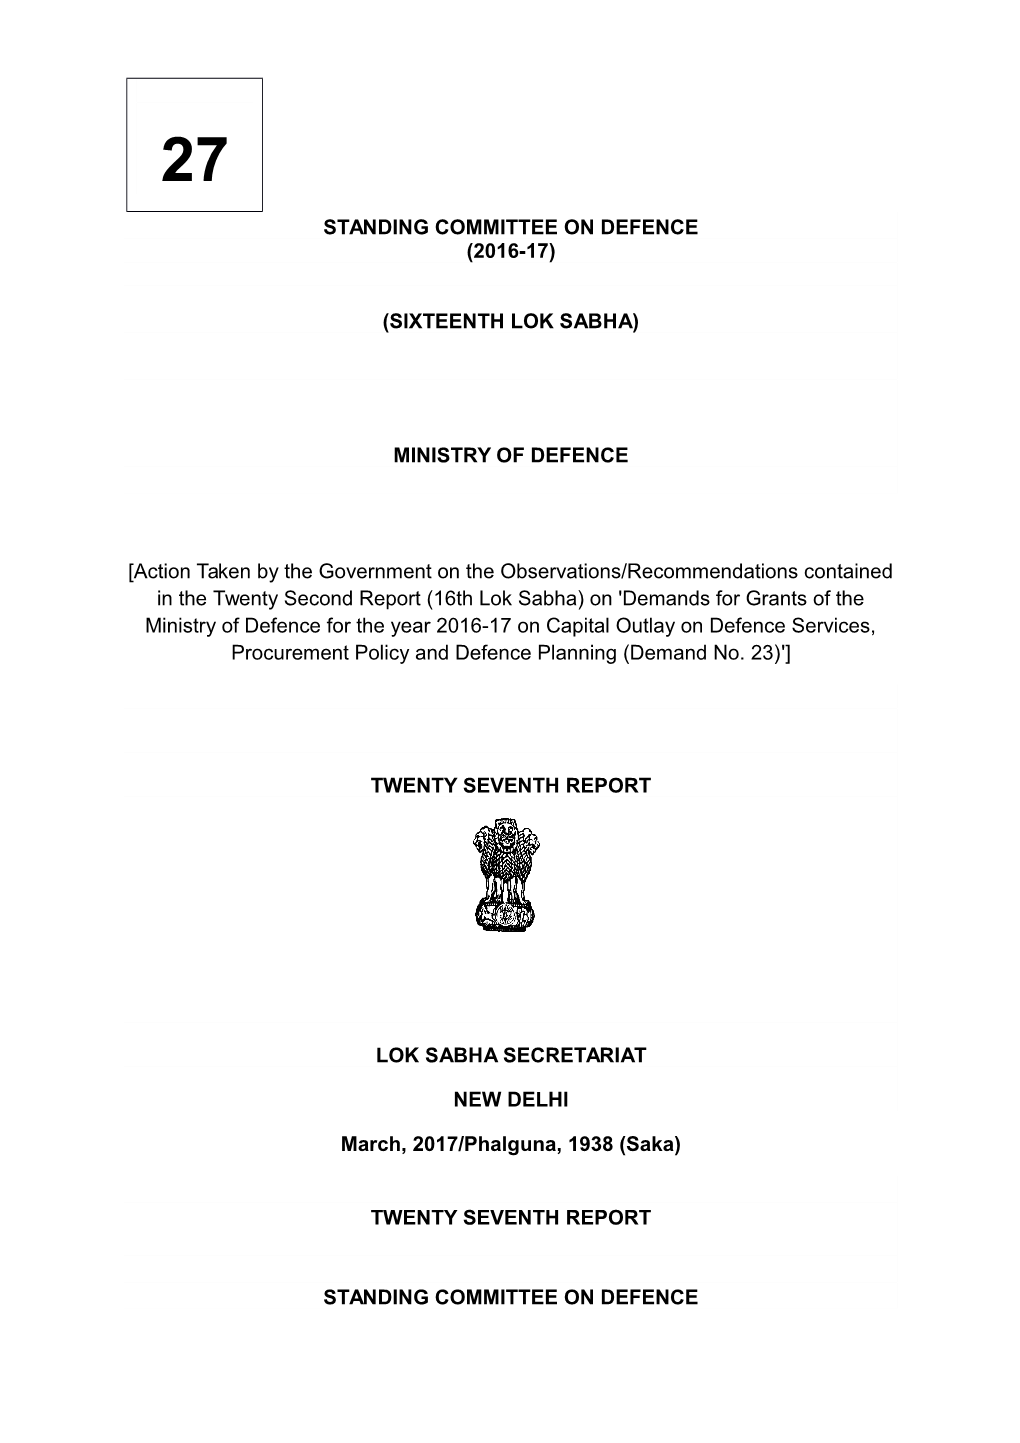 STANDING COMMITTEE on DEFENCE (2016-17) (SIXTEENTH LOK SABHA) MINISTRY of DEFENCE [Action Taken by the Government on the Observa